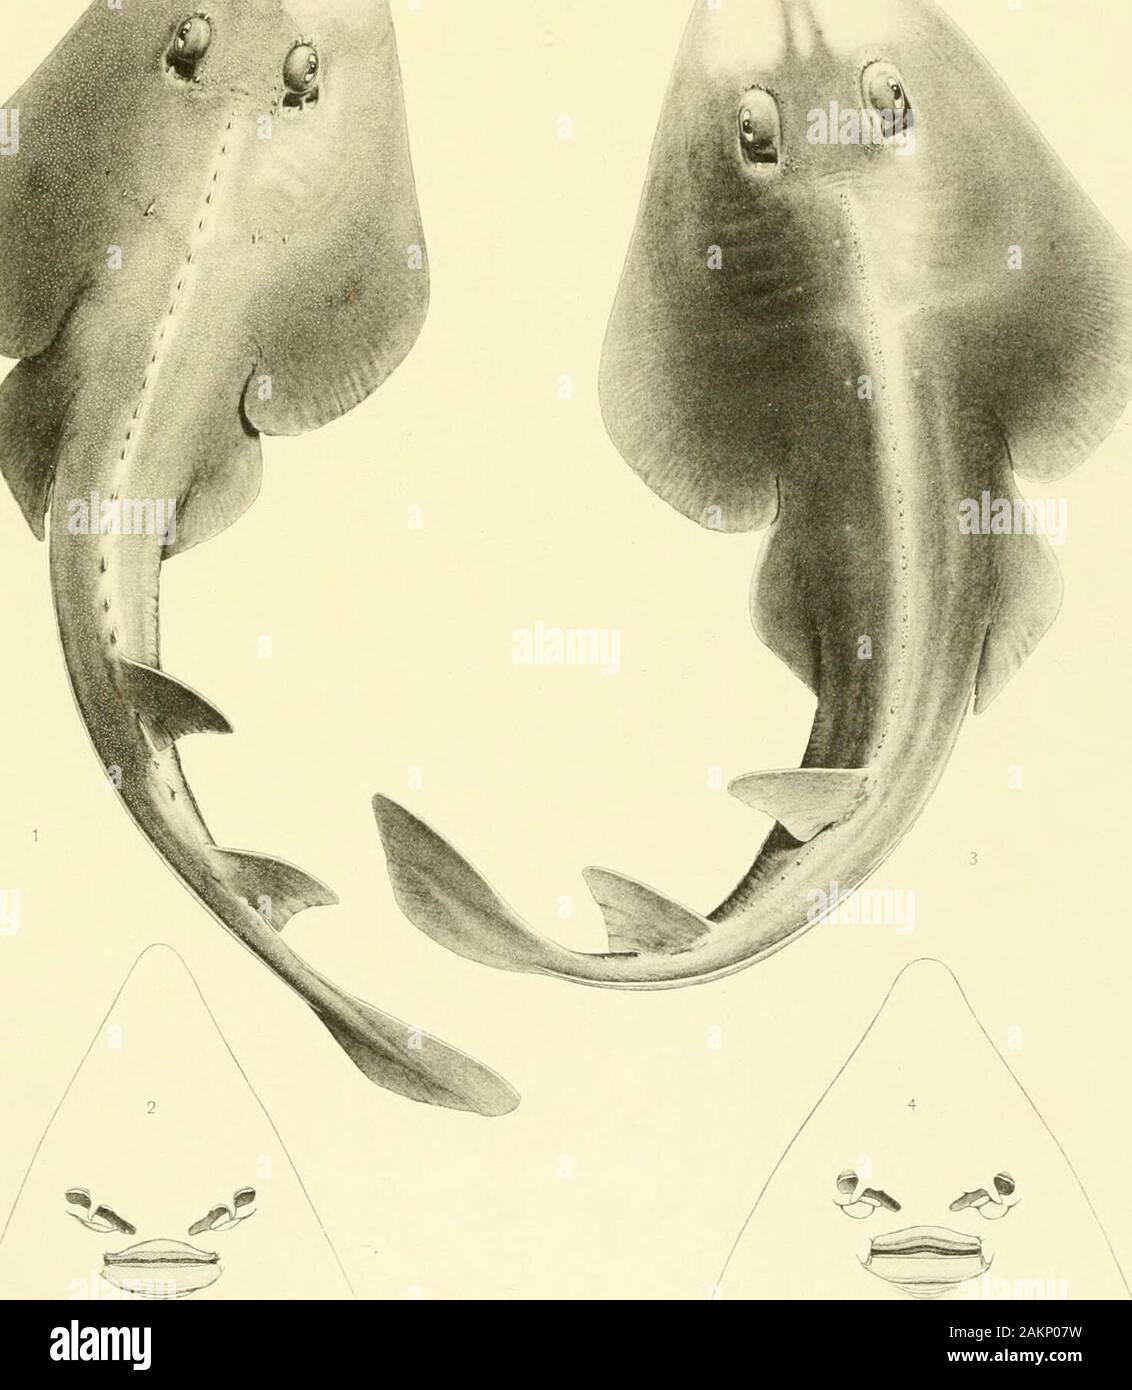 Memoirs of the Museum of Comparative Zoölogy, at Harvard College, Cambridge, Mass . hElIOTVPE CO. PLATE 17». PLATE 17a. RHINOBATIDAE. Fig. 1-2. RnmoBATDa rasus (Page 270). Fig. .3-4. Rhinobato.s planiceps (Page 2.S3). 1. Dorsal view of a specimen 14j inches long. 2. Head from below. 3. Dorsal view of a specimen 17| inches long. 4. Head from below. Mem. Mus. Comp. Zool., Vol. 36. Plagiostomes, Plate 17. / t. E. N. FISCHER, 0£L. •^ELlOTrPE CO. PLATE 17b. PLATE 17. RHINOBATIDAE and RAIIDAE. Fig. 1-2. RniNOBATUS ACDTUs (Page 273). Fig. 3. R.u. kincaidii (Page 343). 1. Dorsal view of a specimen 13 Stock Photo